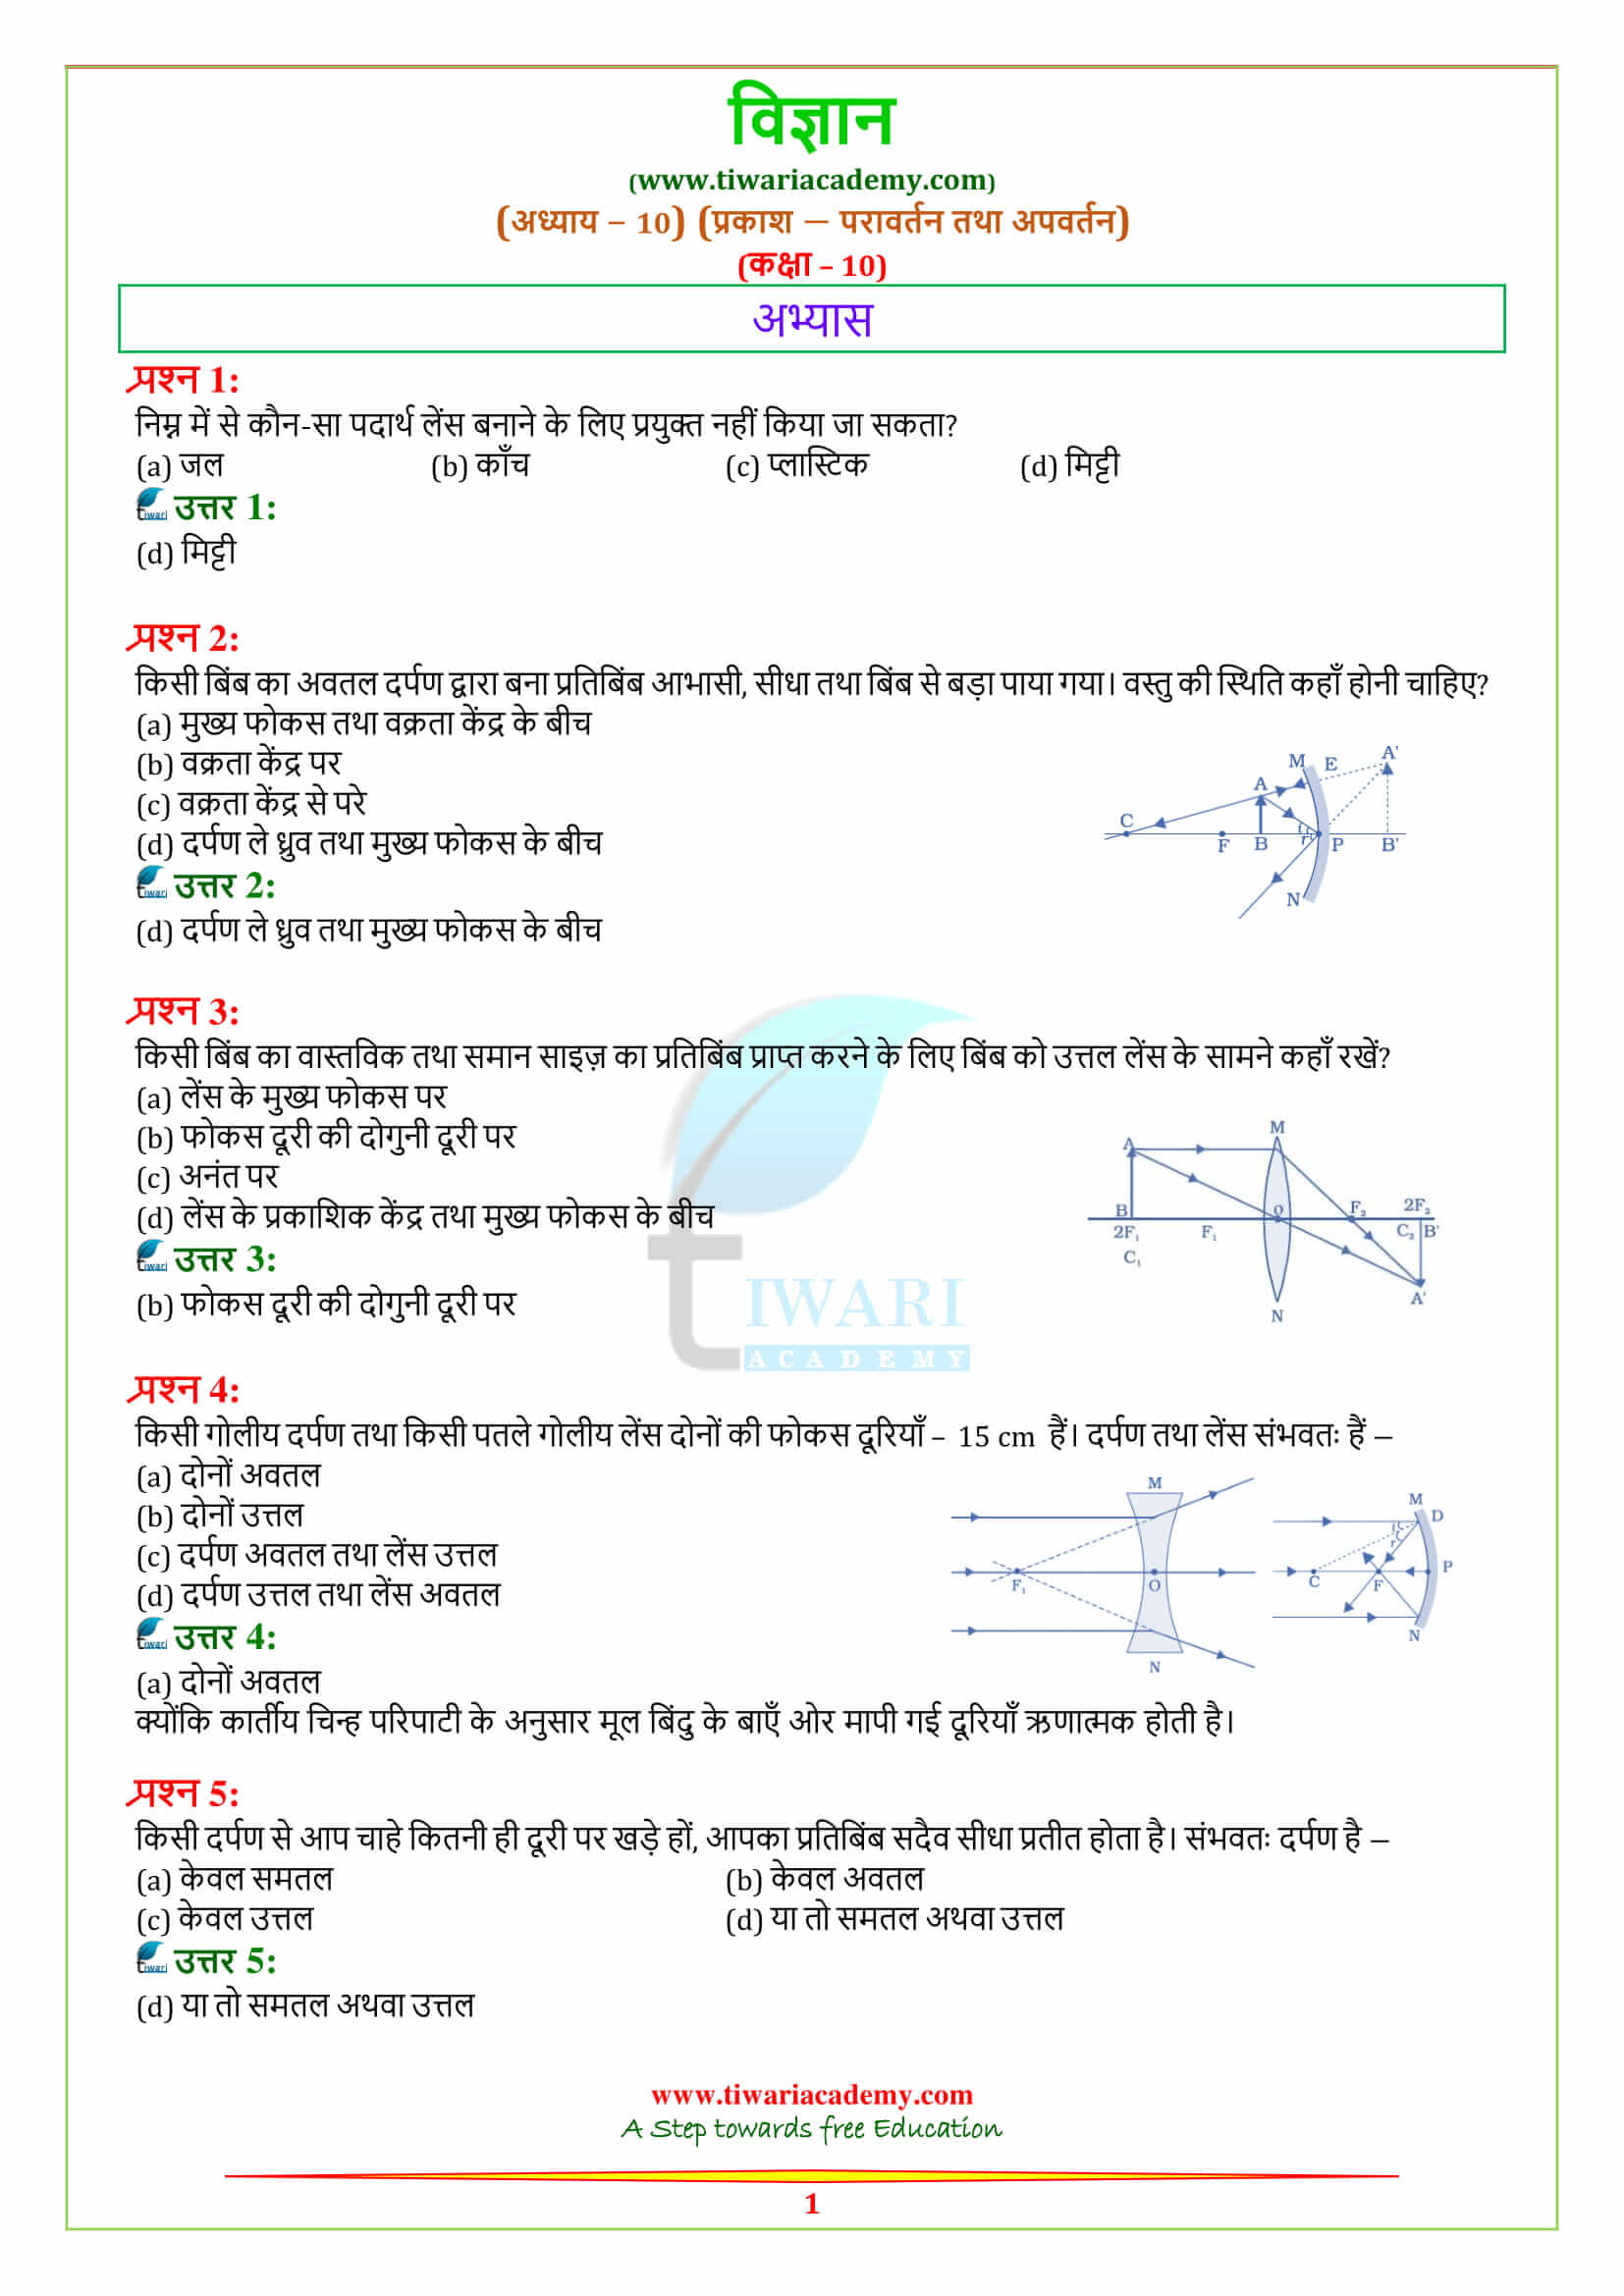 NCERT Solutions for Class 10 Science Chapter 10 Light – Reflection and Refraction अभ्यास के प्रश्न उत्तर